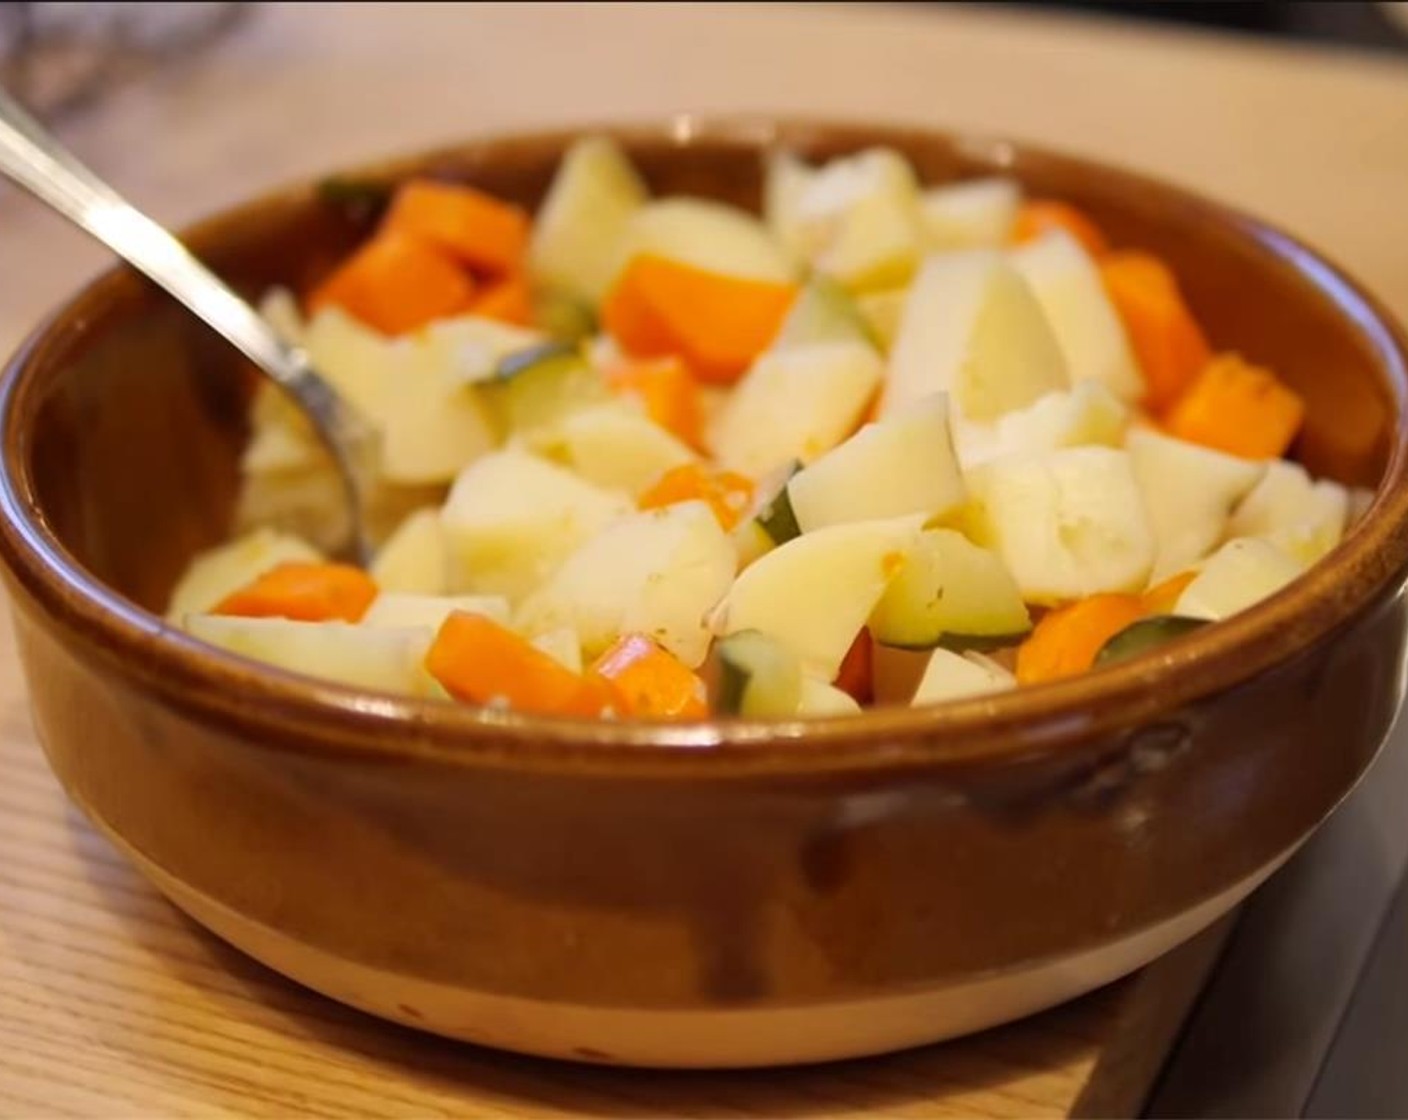 step 2 Put russet potatoes, zucchini, and carrot into a bowl, and mash with a fork. Season with some Salt (to taste) and Ground Black Pepper (to taste). Heat a nonstick pan on the stove top with some Vegetable Oil (as needed).